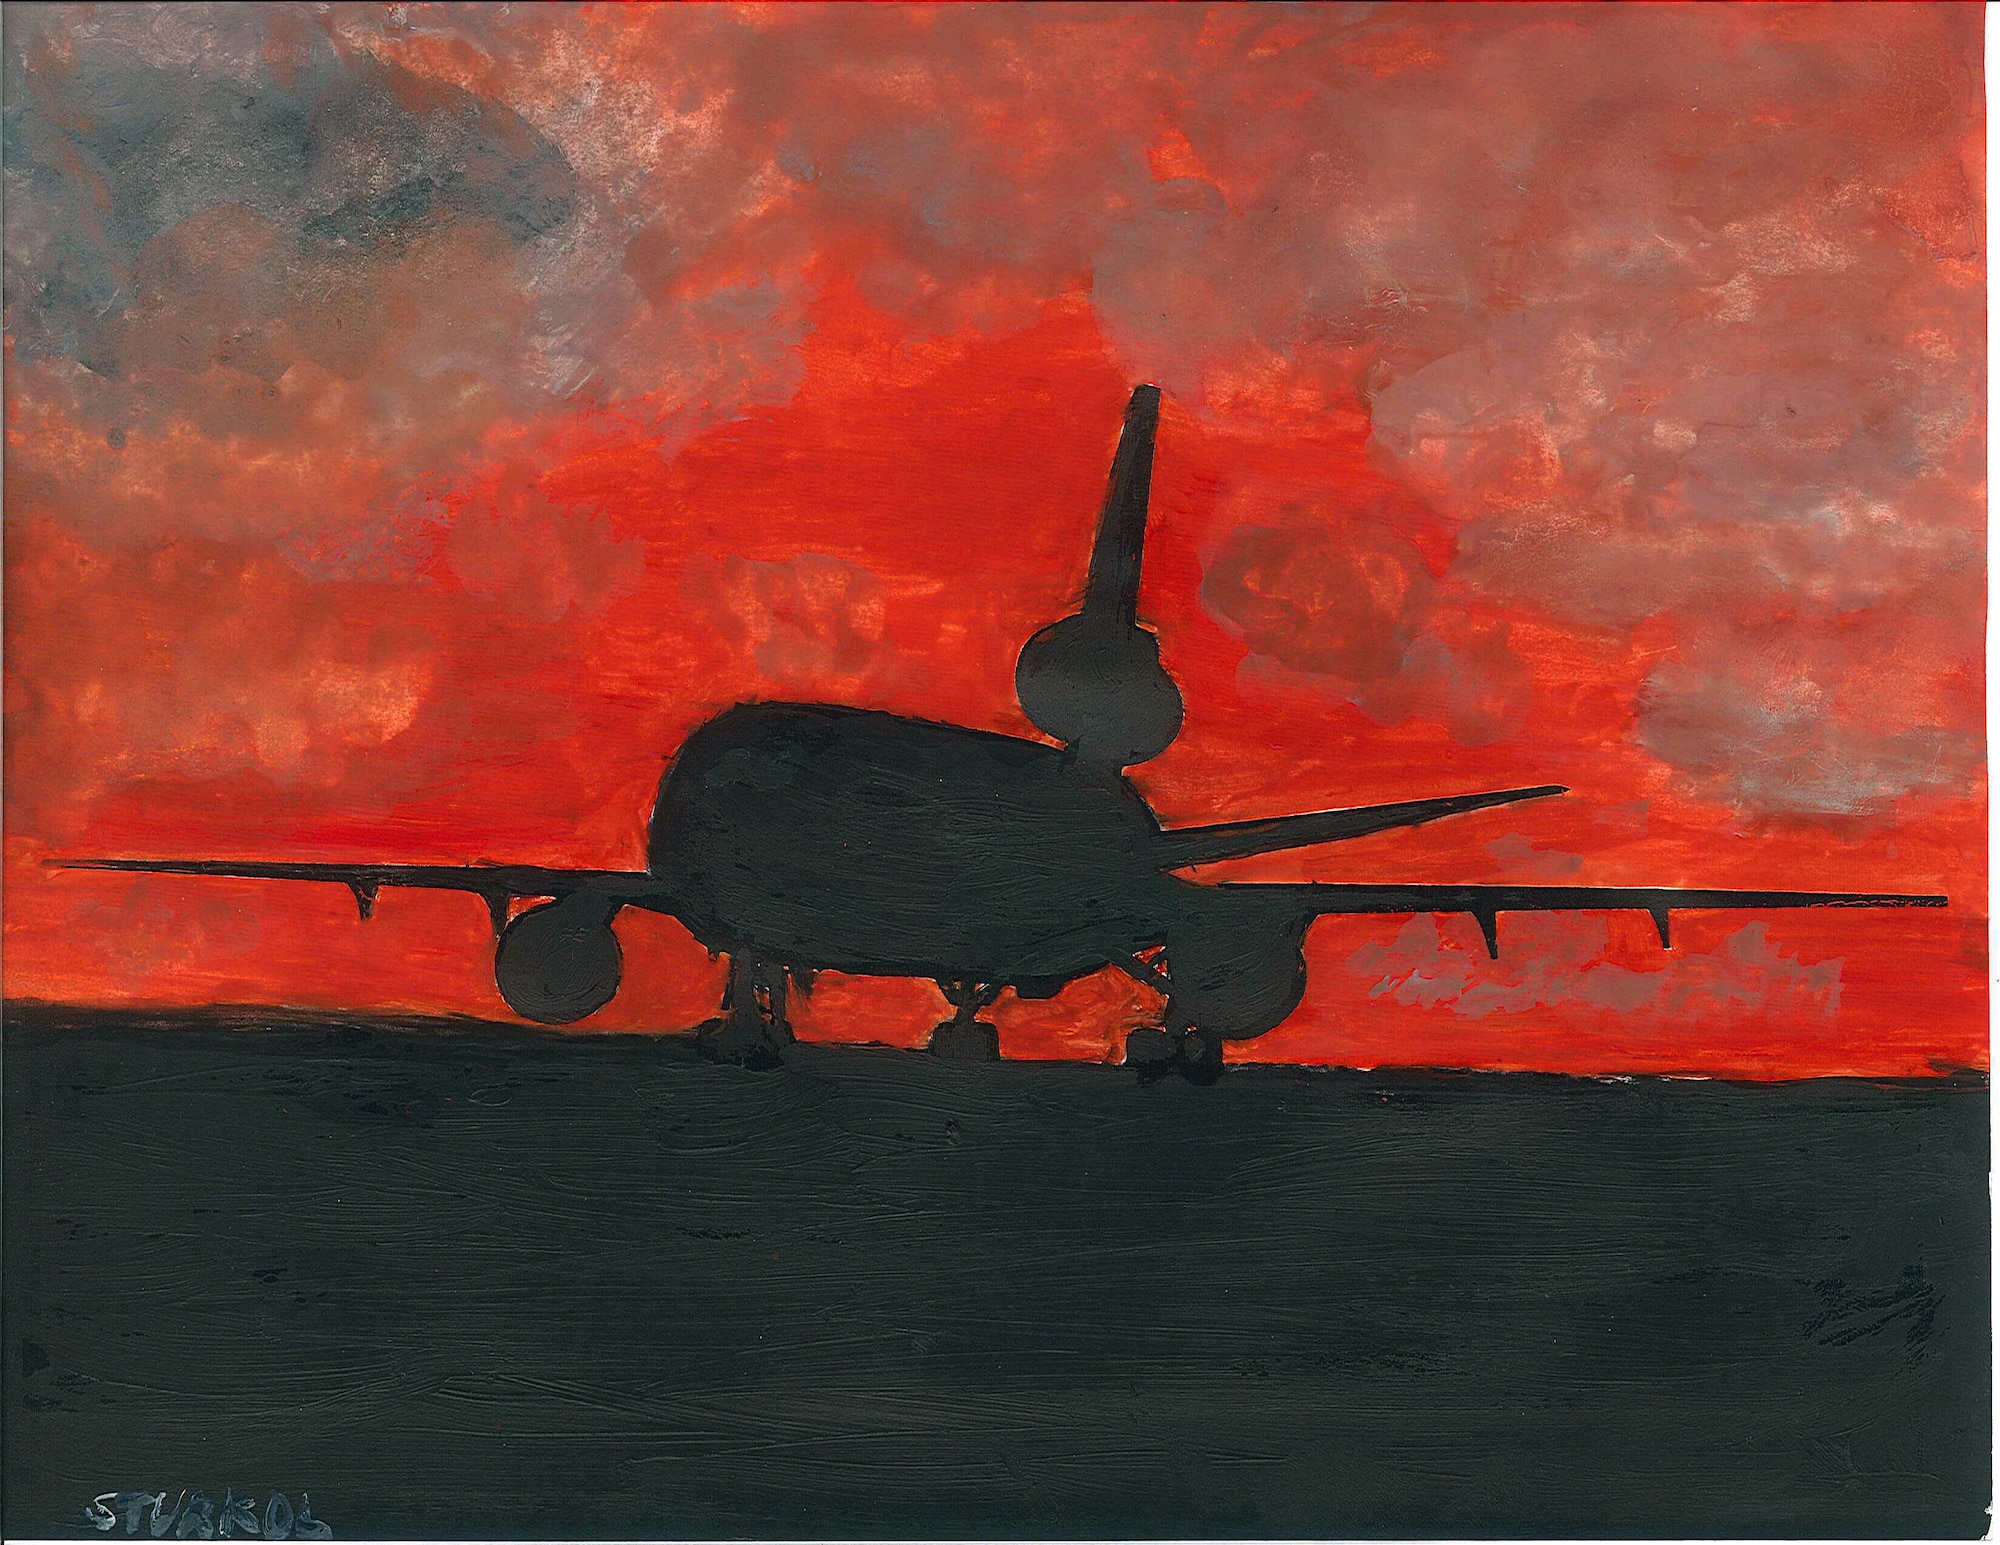 This is a scan of a watercolor silhouette painting of a KC-10 Extender aircraft by Master Sgt. Scott T. Sturkol from a series of four paintings called "Silhouette Series: 380th Air Expeditionary Wing Aircraft." The paintings have been donated to the wing by the artist and the 380th AEW "Top Three" organization. Sergeant Sturkol is a public affairs superintendent deployed from Air Mobility Command Public Affairs at Scott Air Force Base, Ill. (U.S. Air Force Photo)